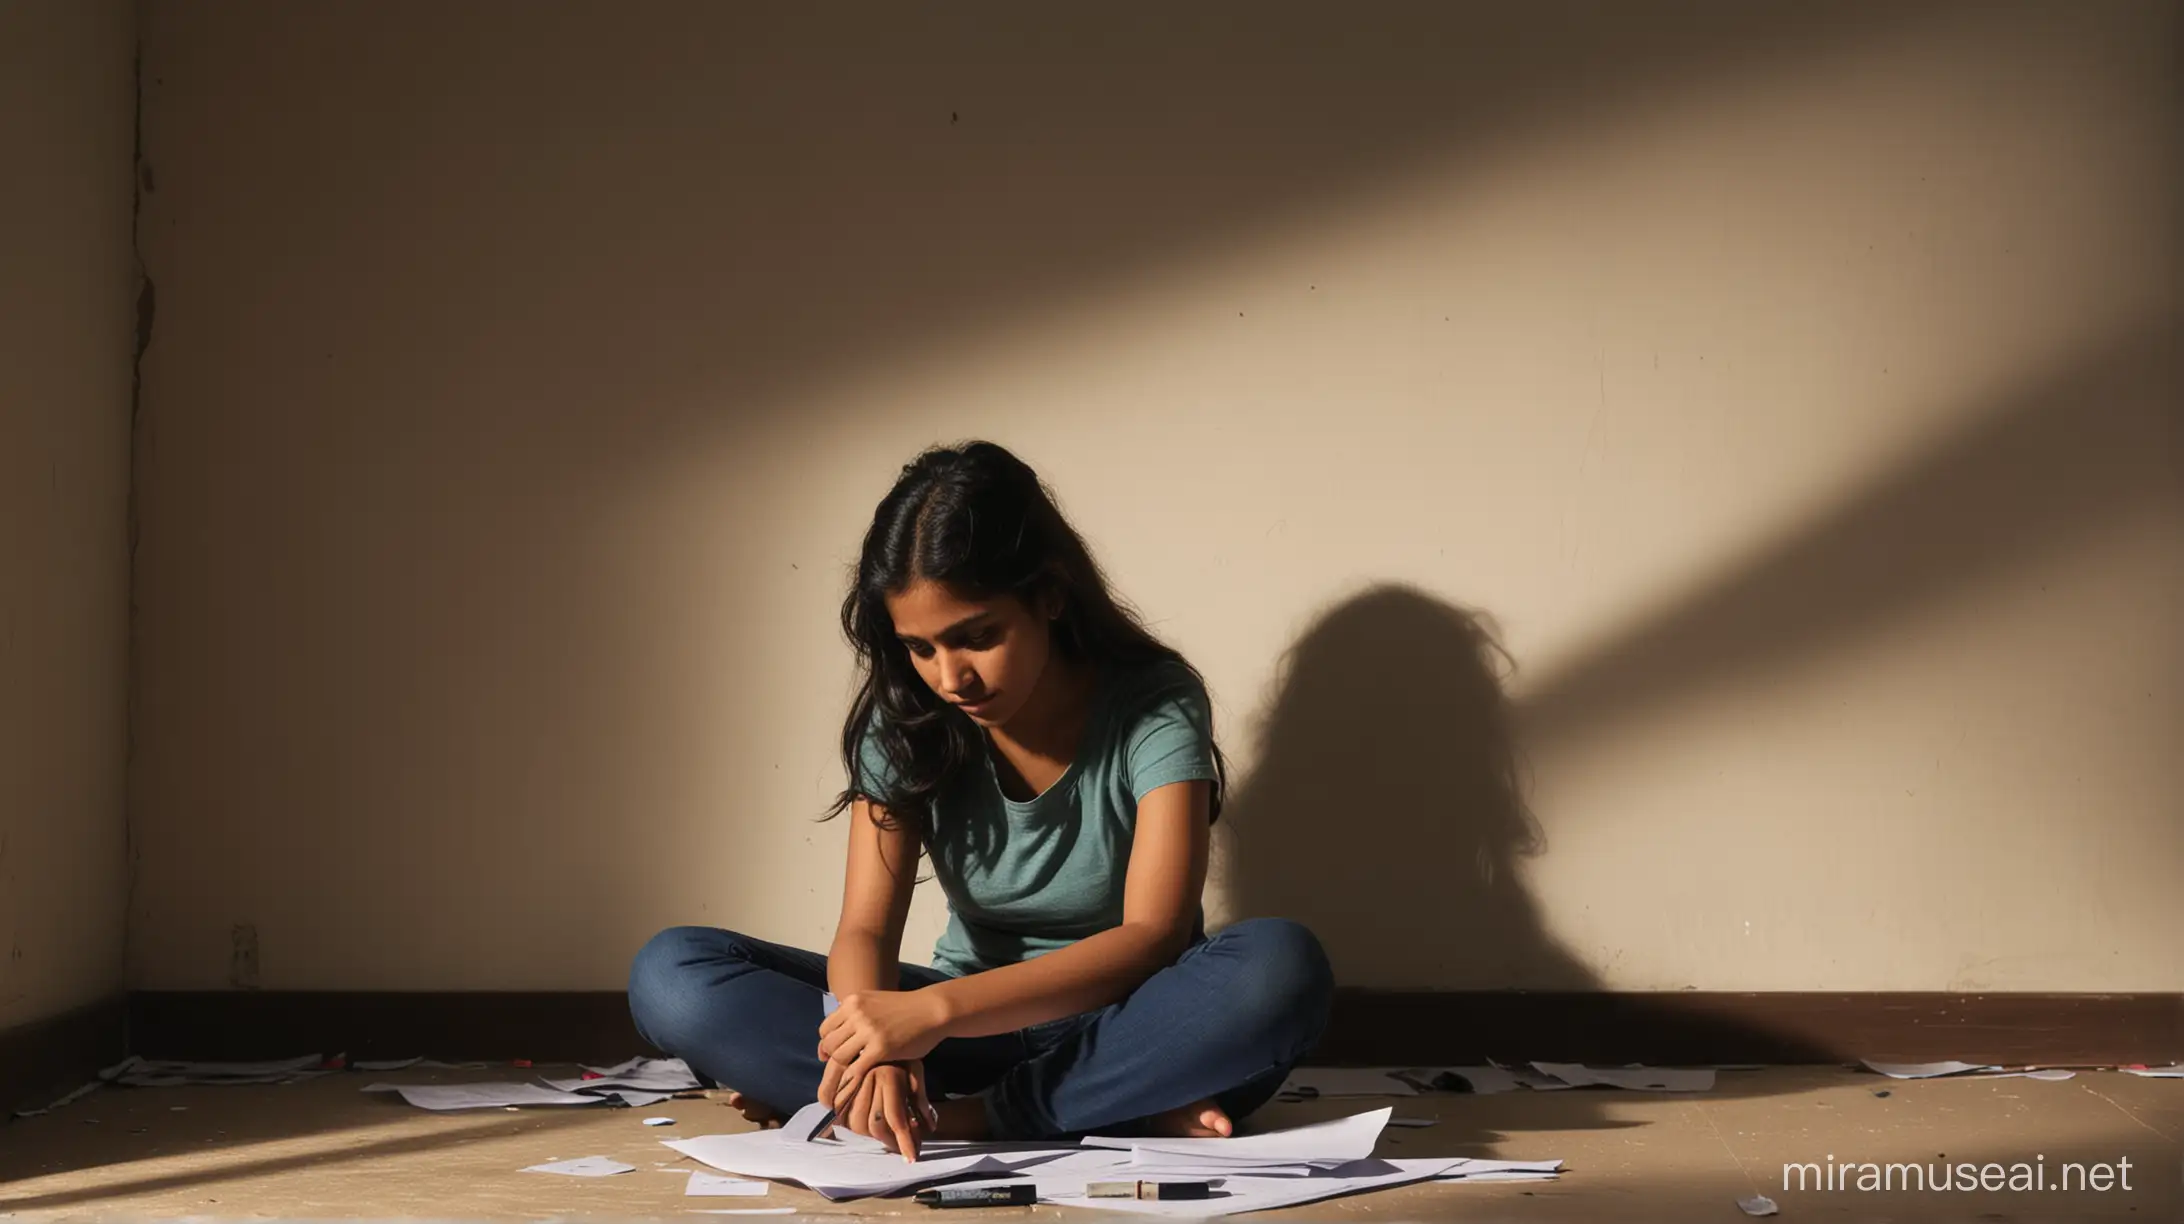 upset and unhappy indian girl sitting in dark room, image should be in shadow, backlight, some study stuff on room wall, one pen and one paper scattered on the ground